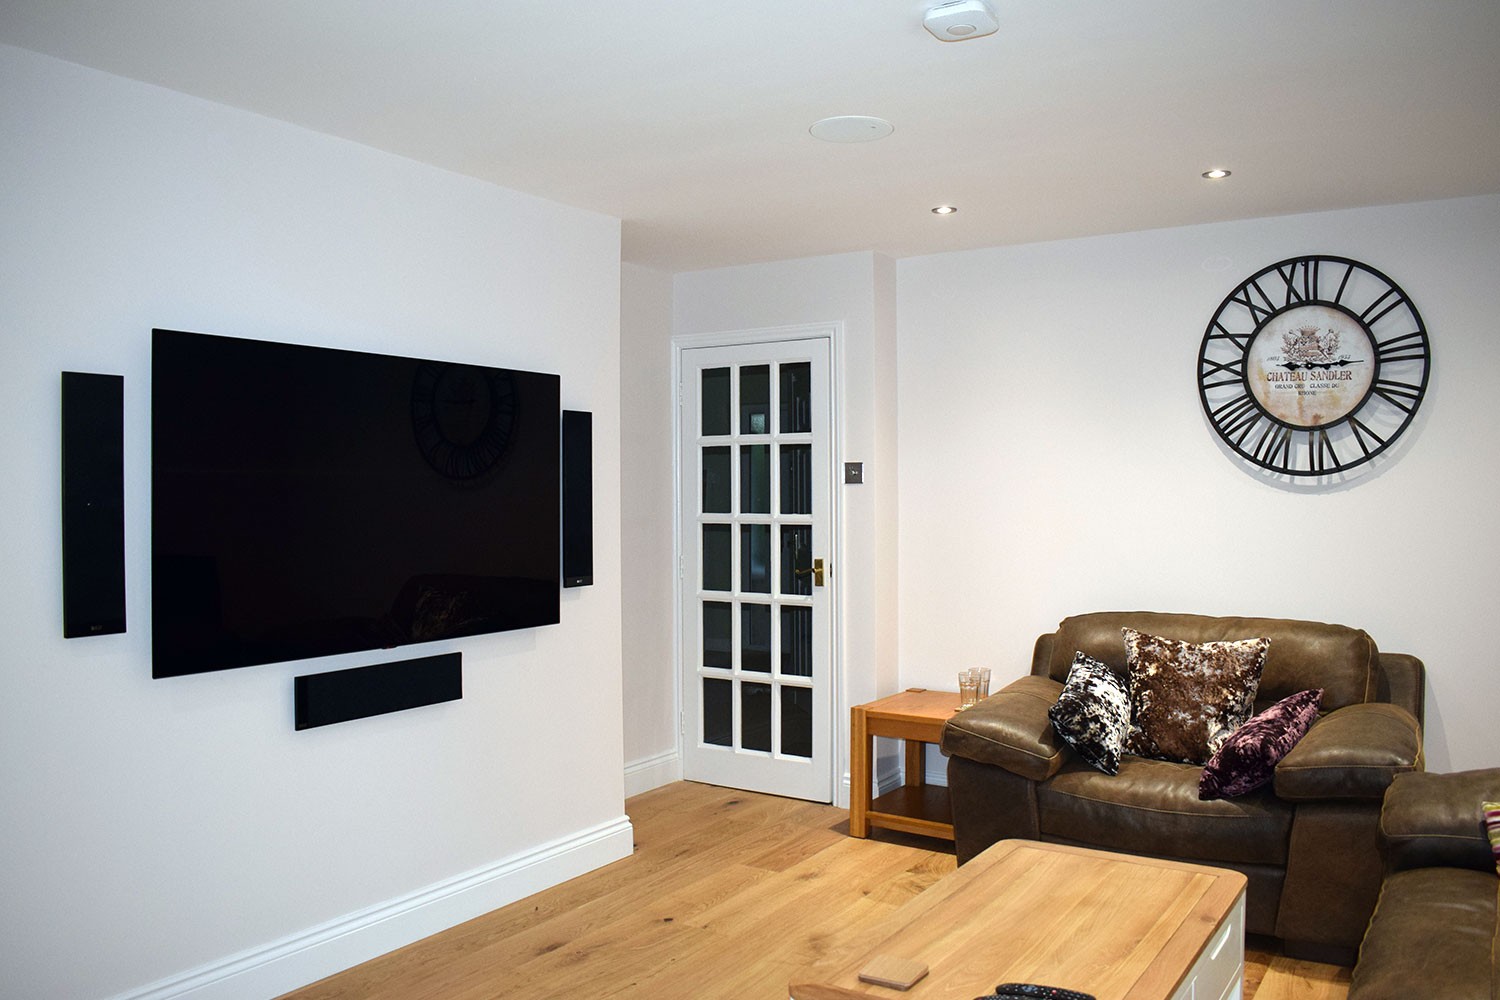 Home Cinema Design - TV Mounting - Specialists in Audio Visual & Smart Home Installations